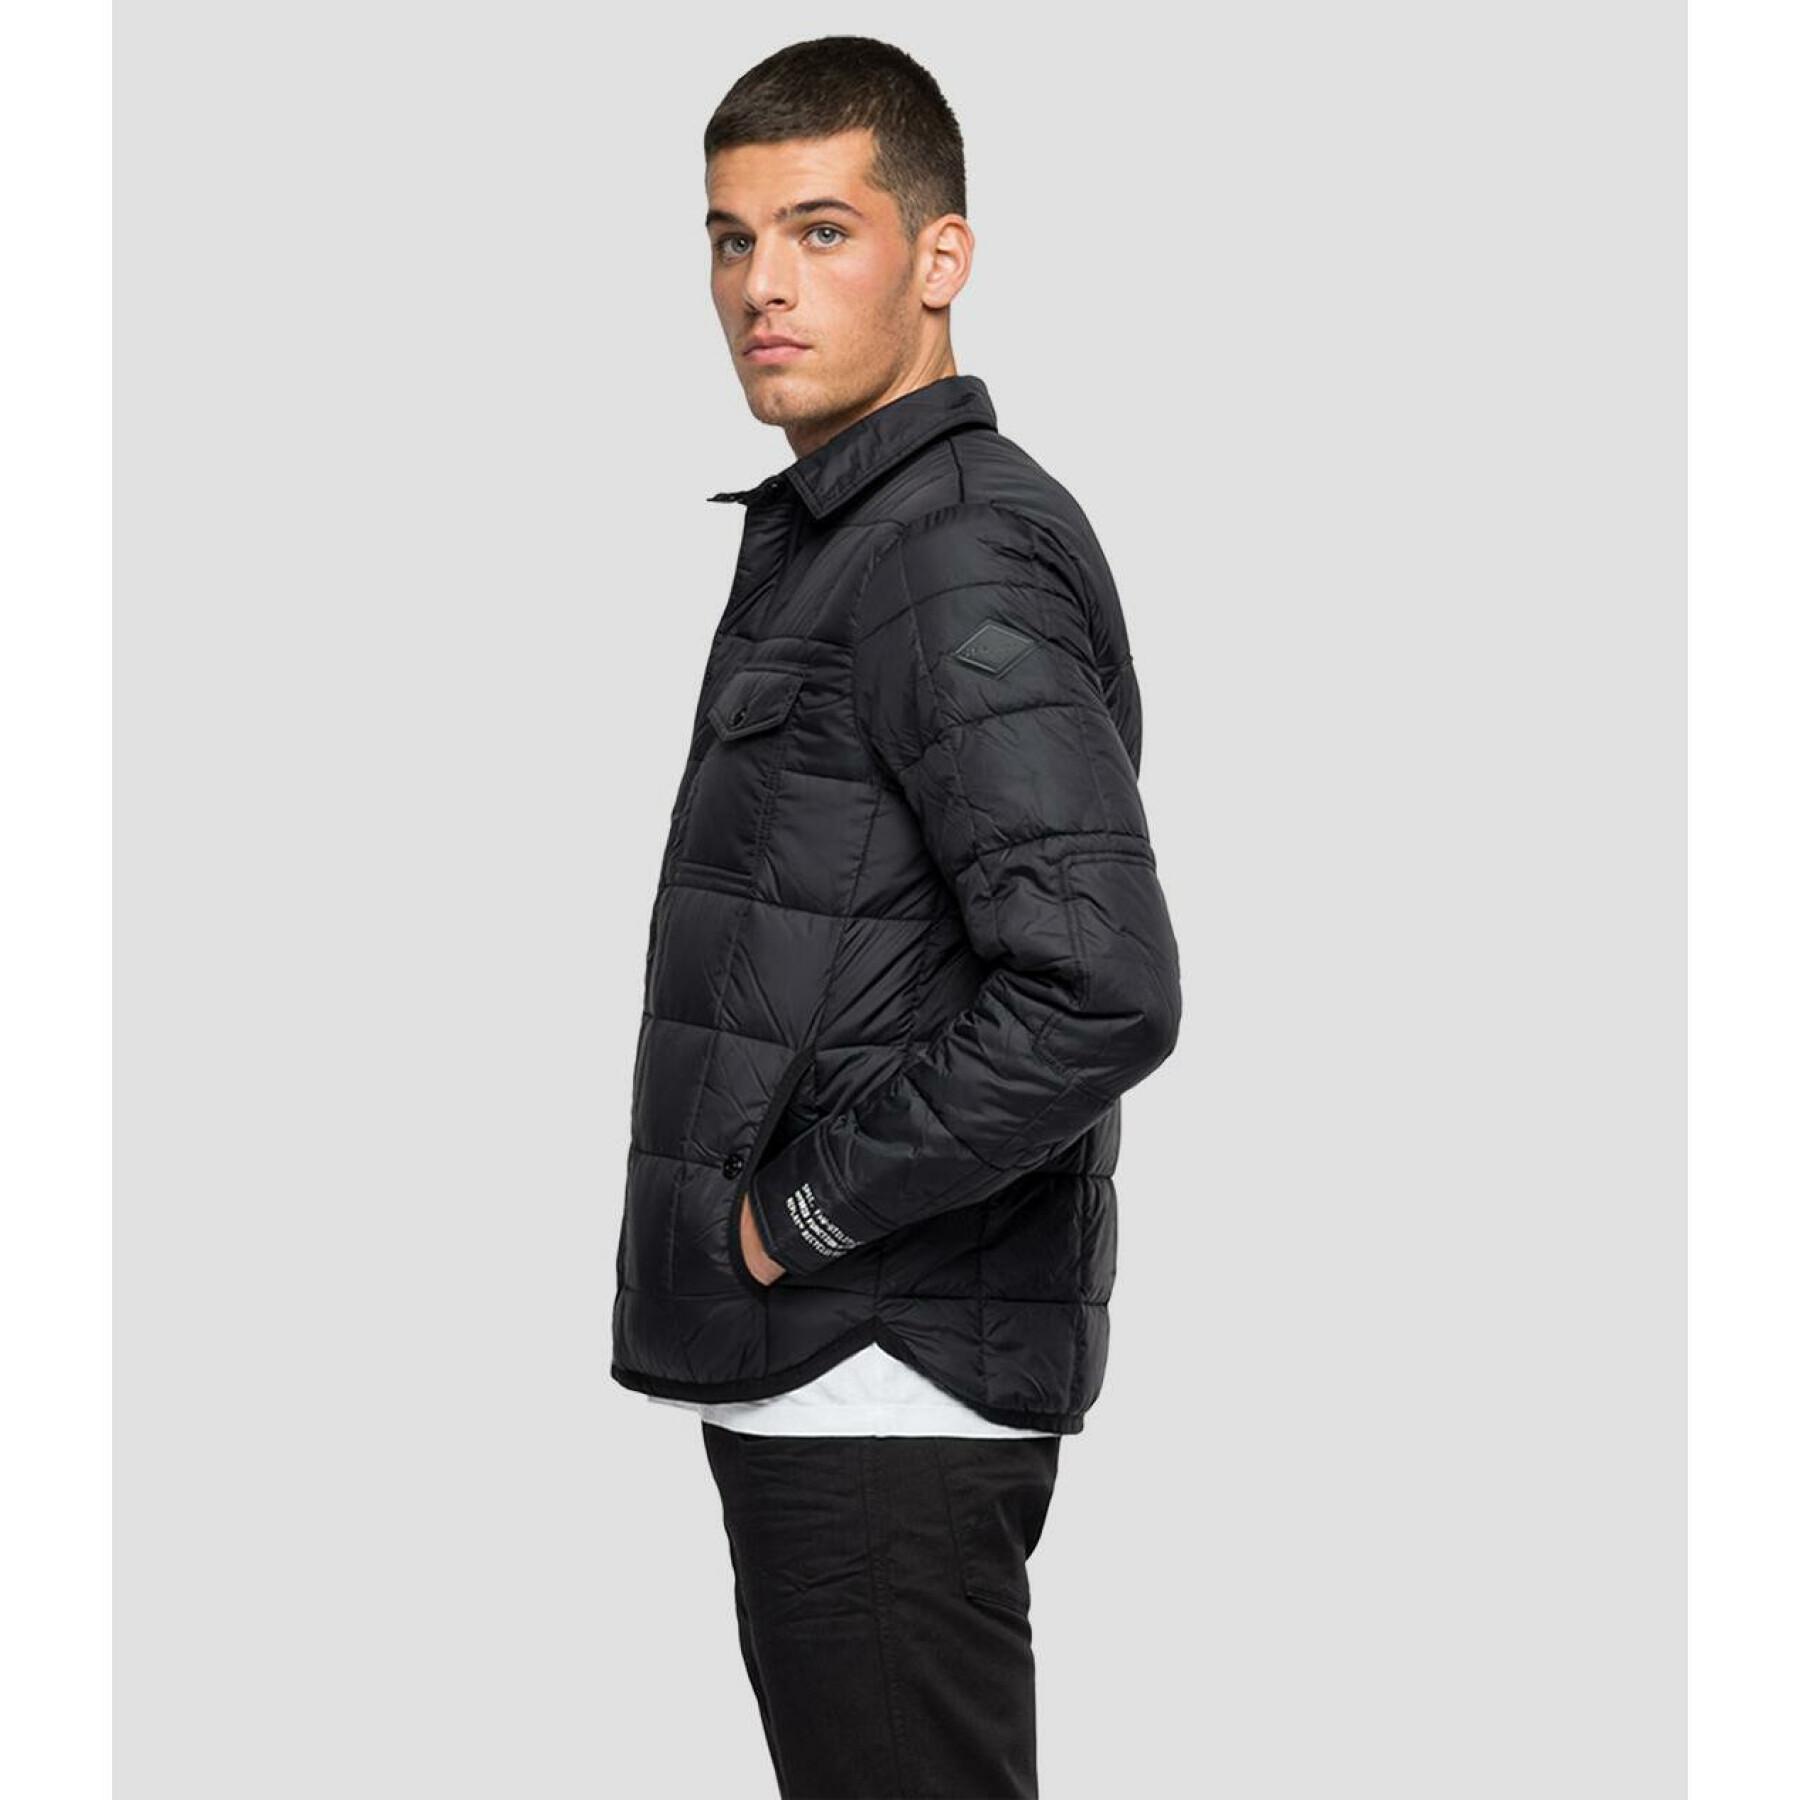 Blouson surchemise Replay recycled